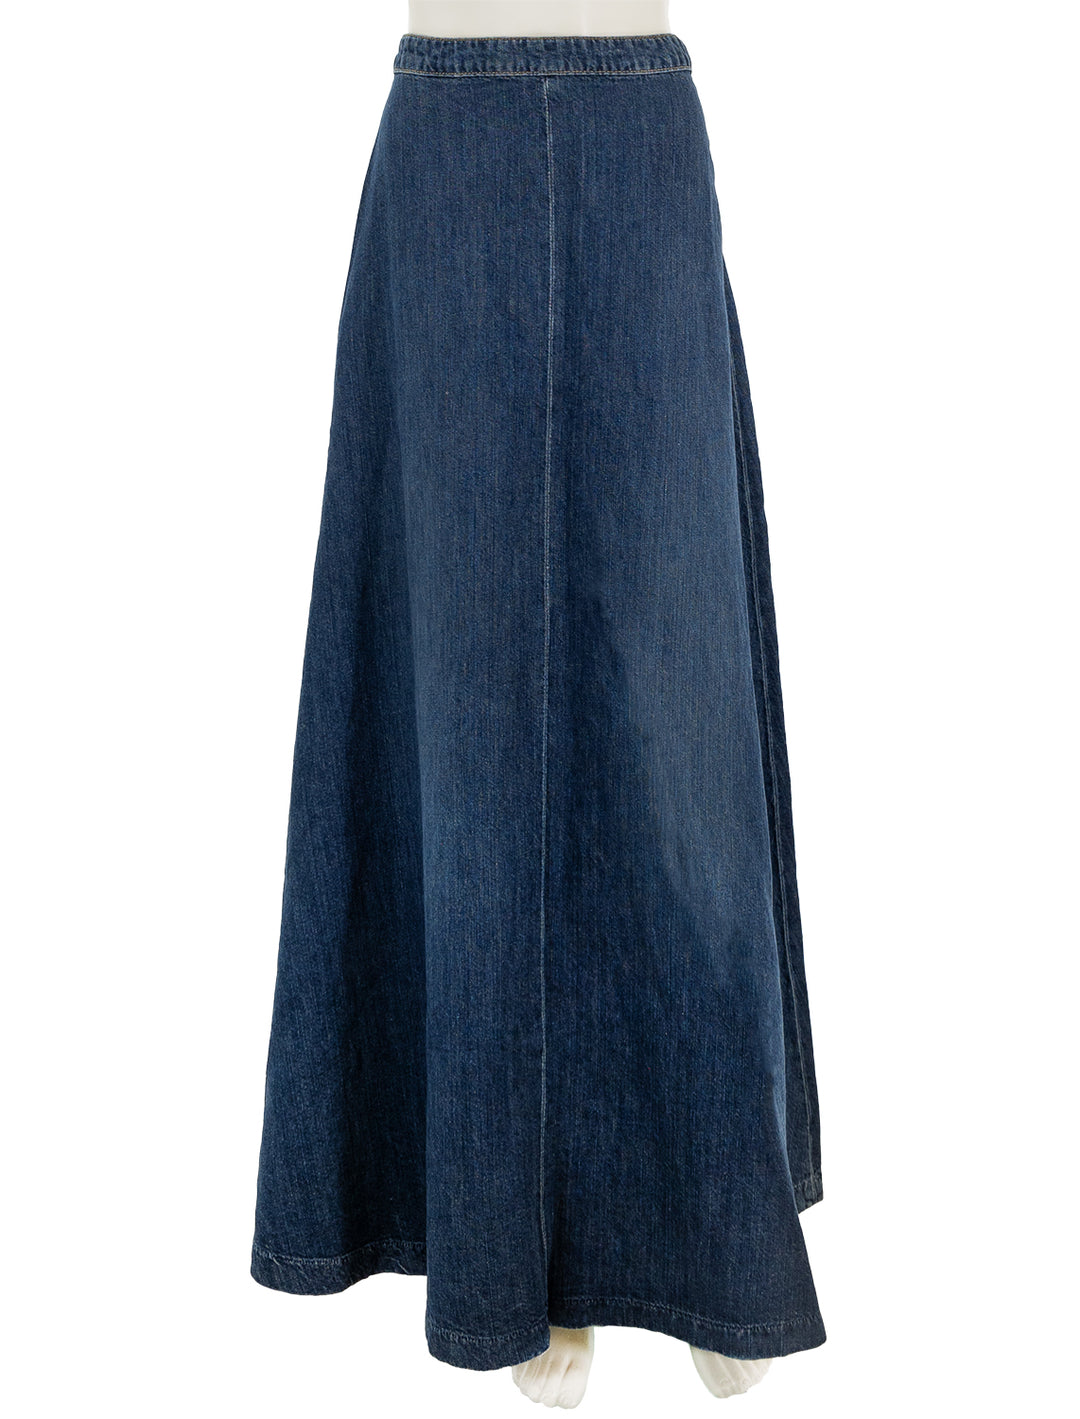 Front view of Nili Lotan's astrid denim skirt in classic wash.